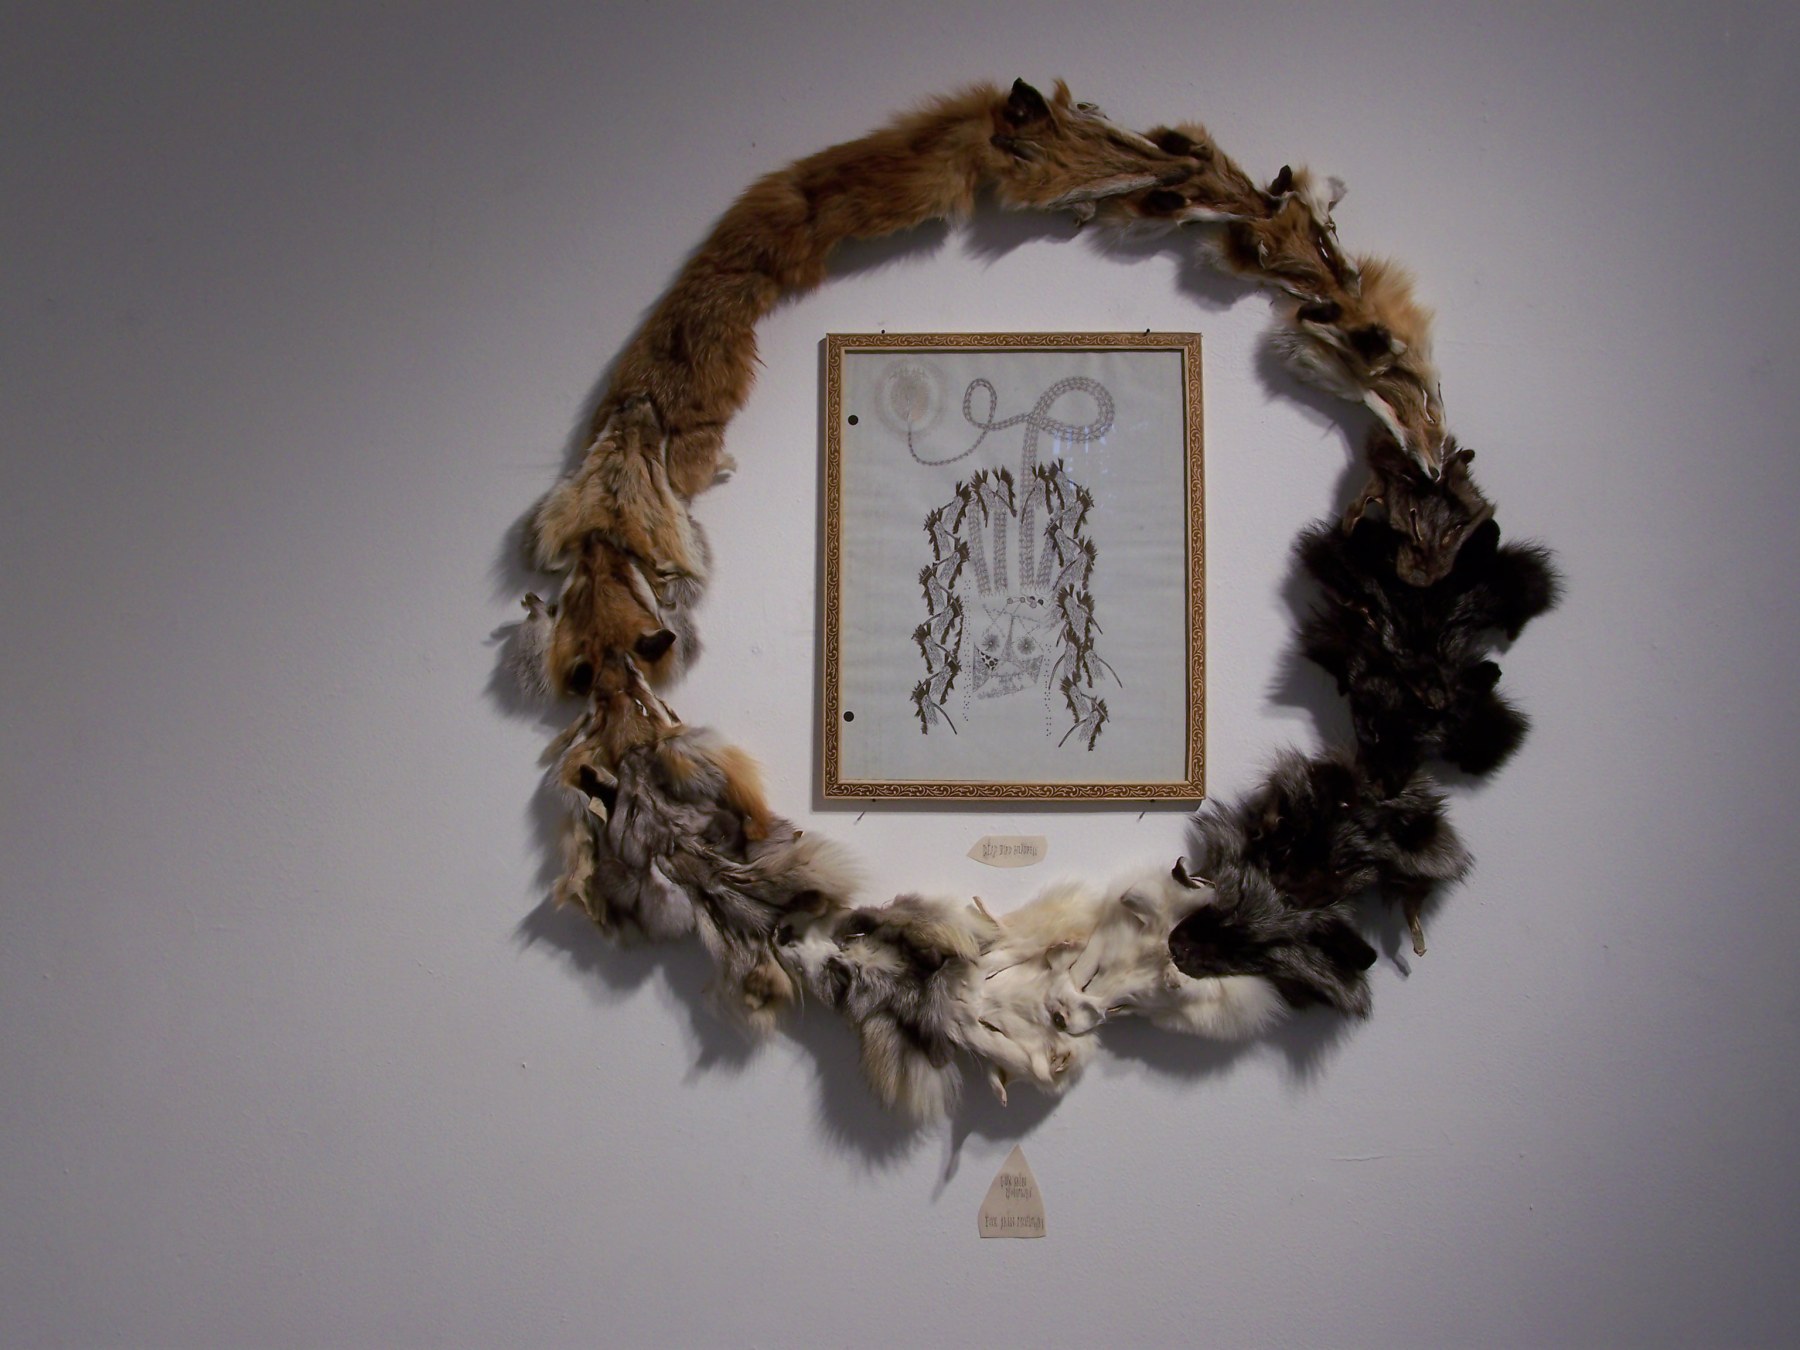 Framed drawing surrounded by taxidermy animals